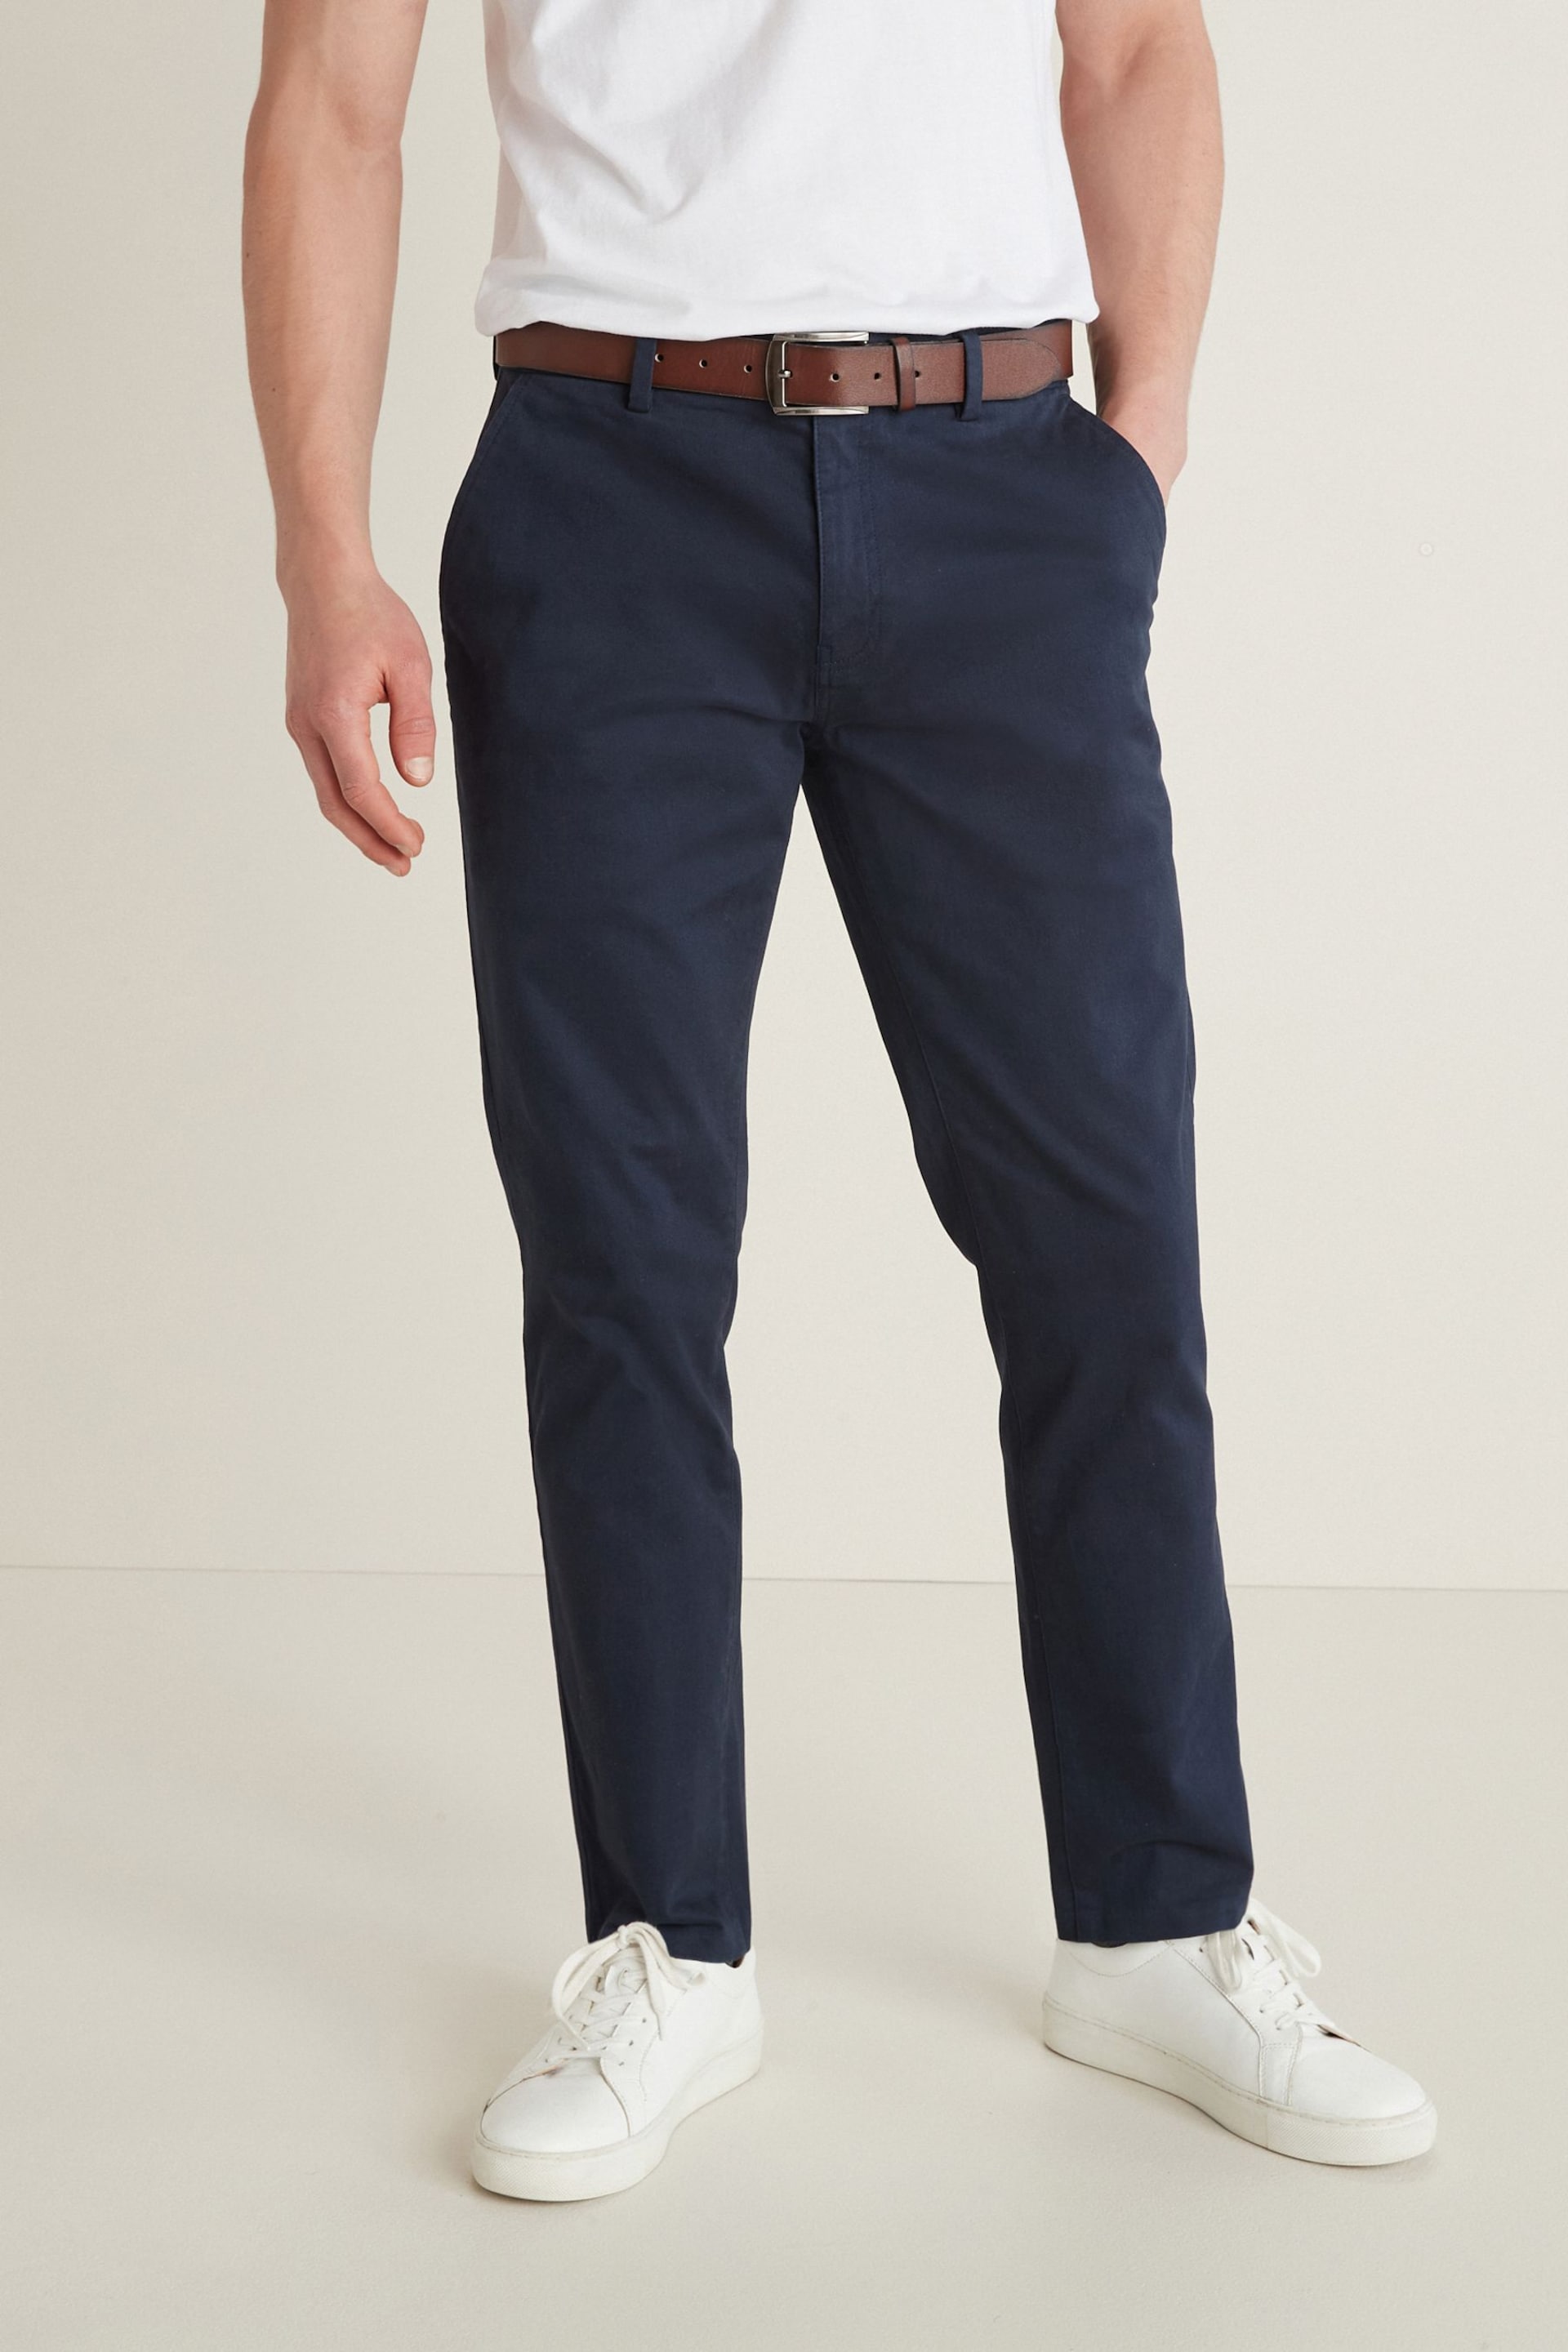 Navy Blue Slim Fit Belted Soft Touch Chino Trousers - Image 6 of 9